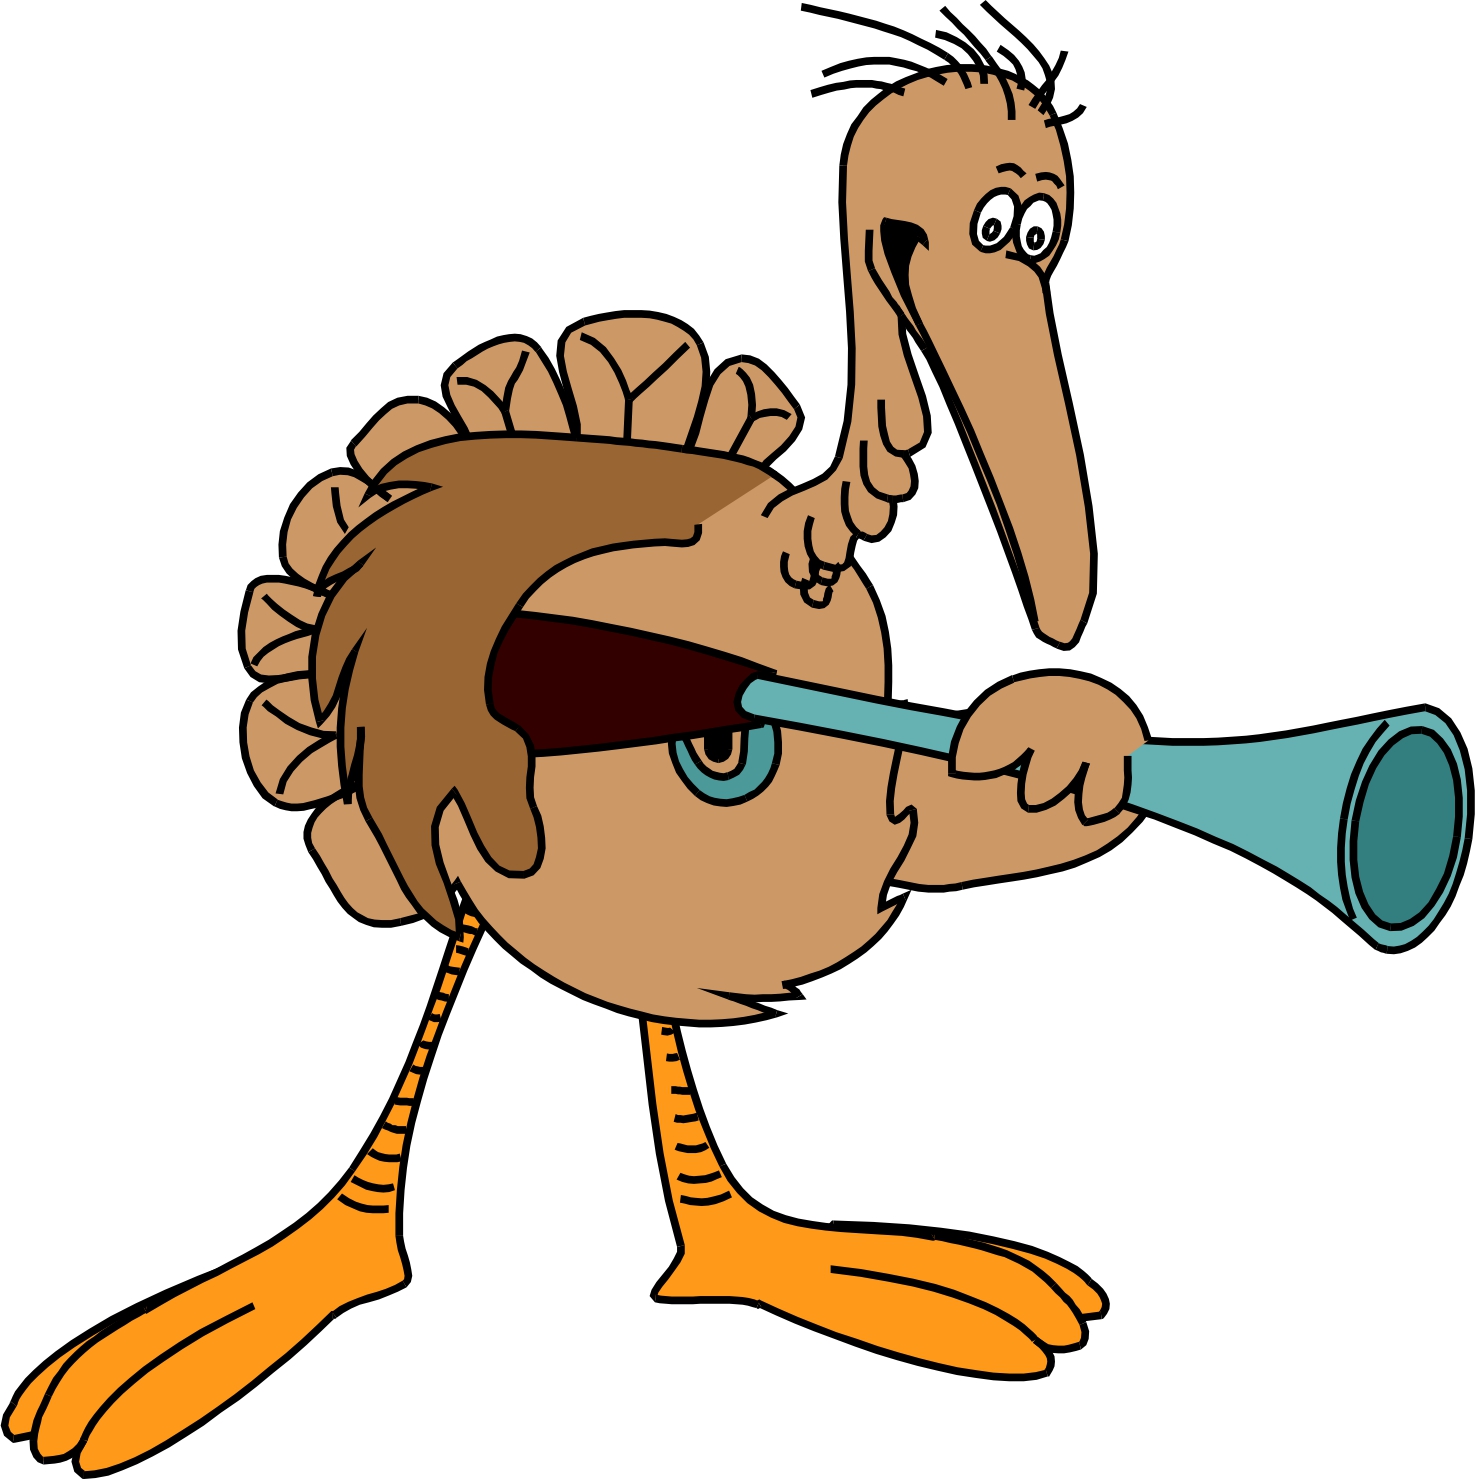 clip art for thanksgiving animated - photo #32